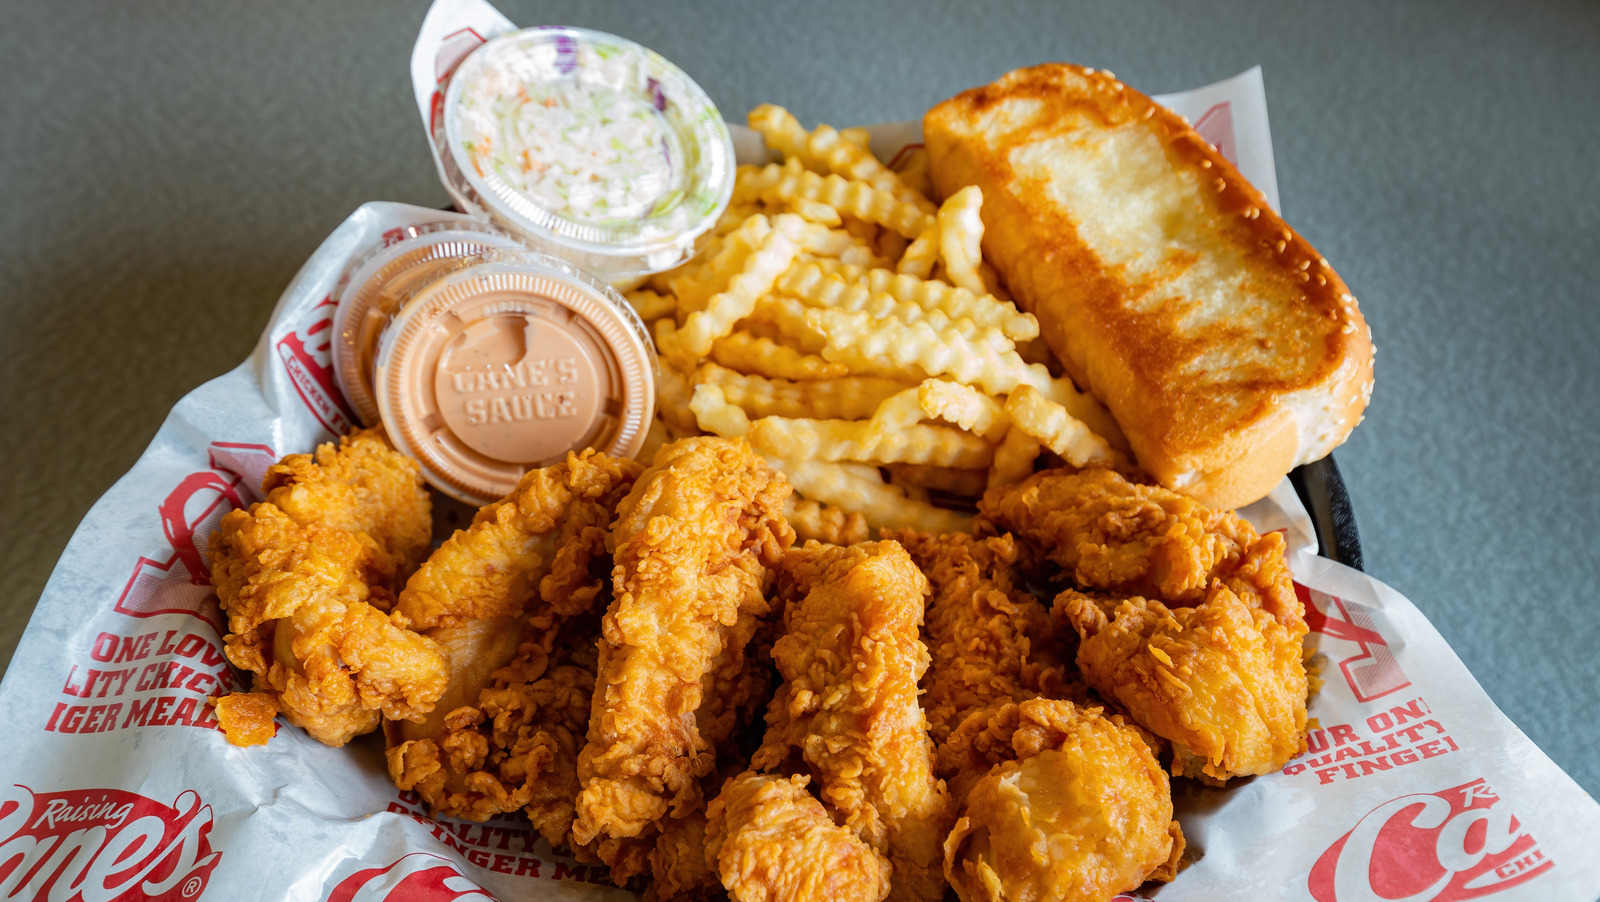 How To Make Raising Canes Chicken Fingers at Home